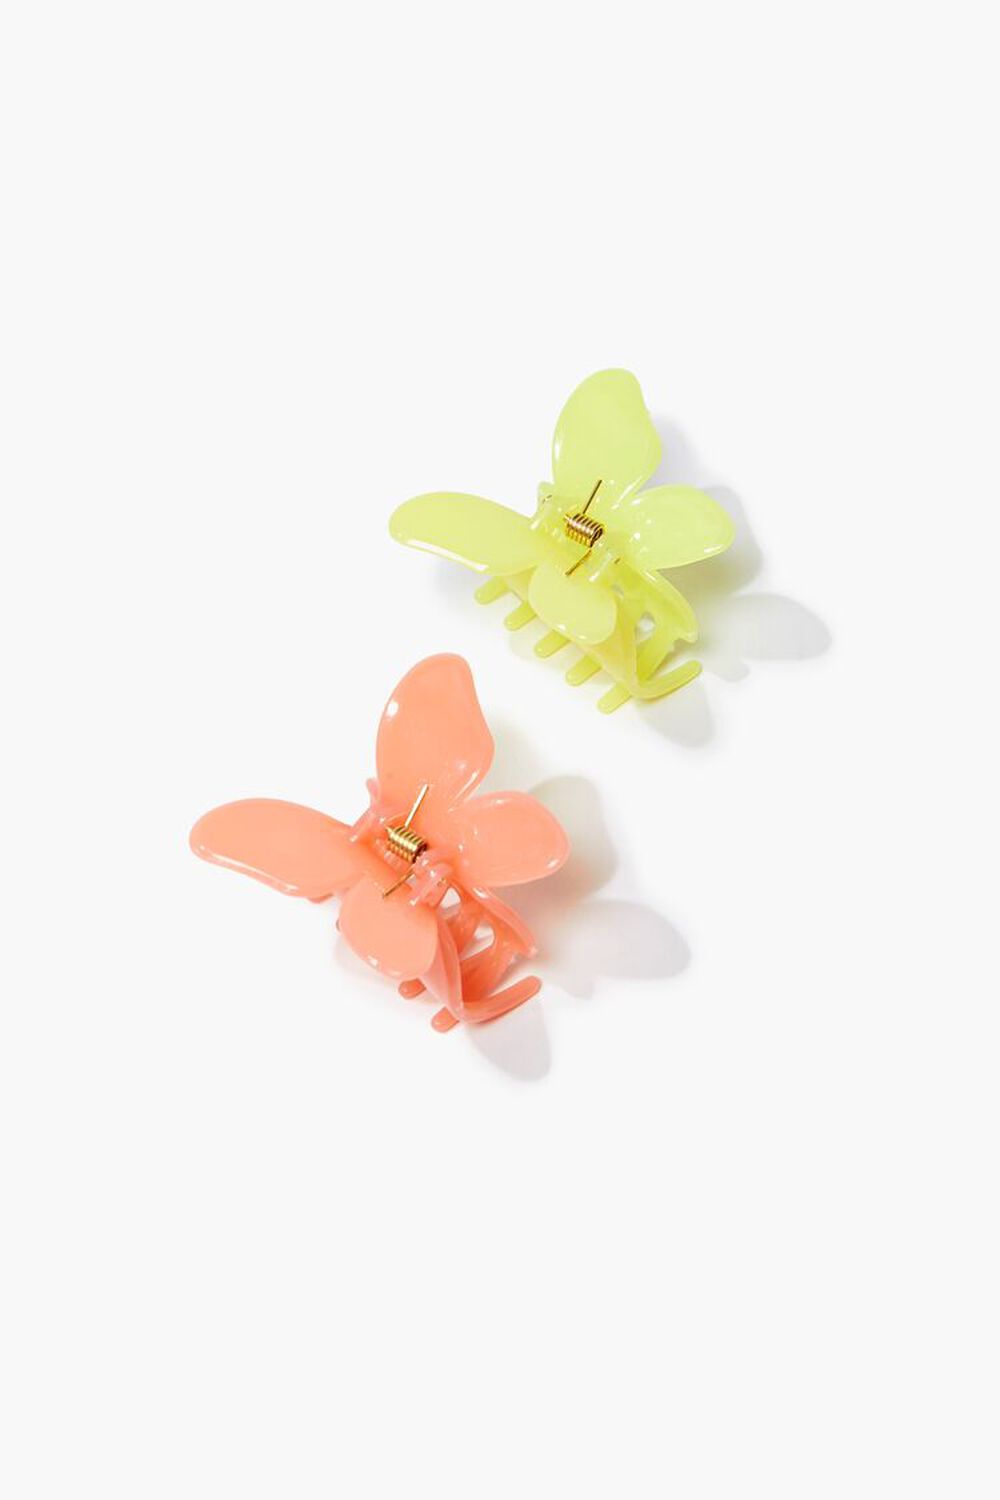 YELLOW/ORANGE Butterfly Claw Hair Clip, image 1